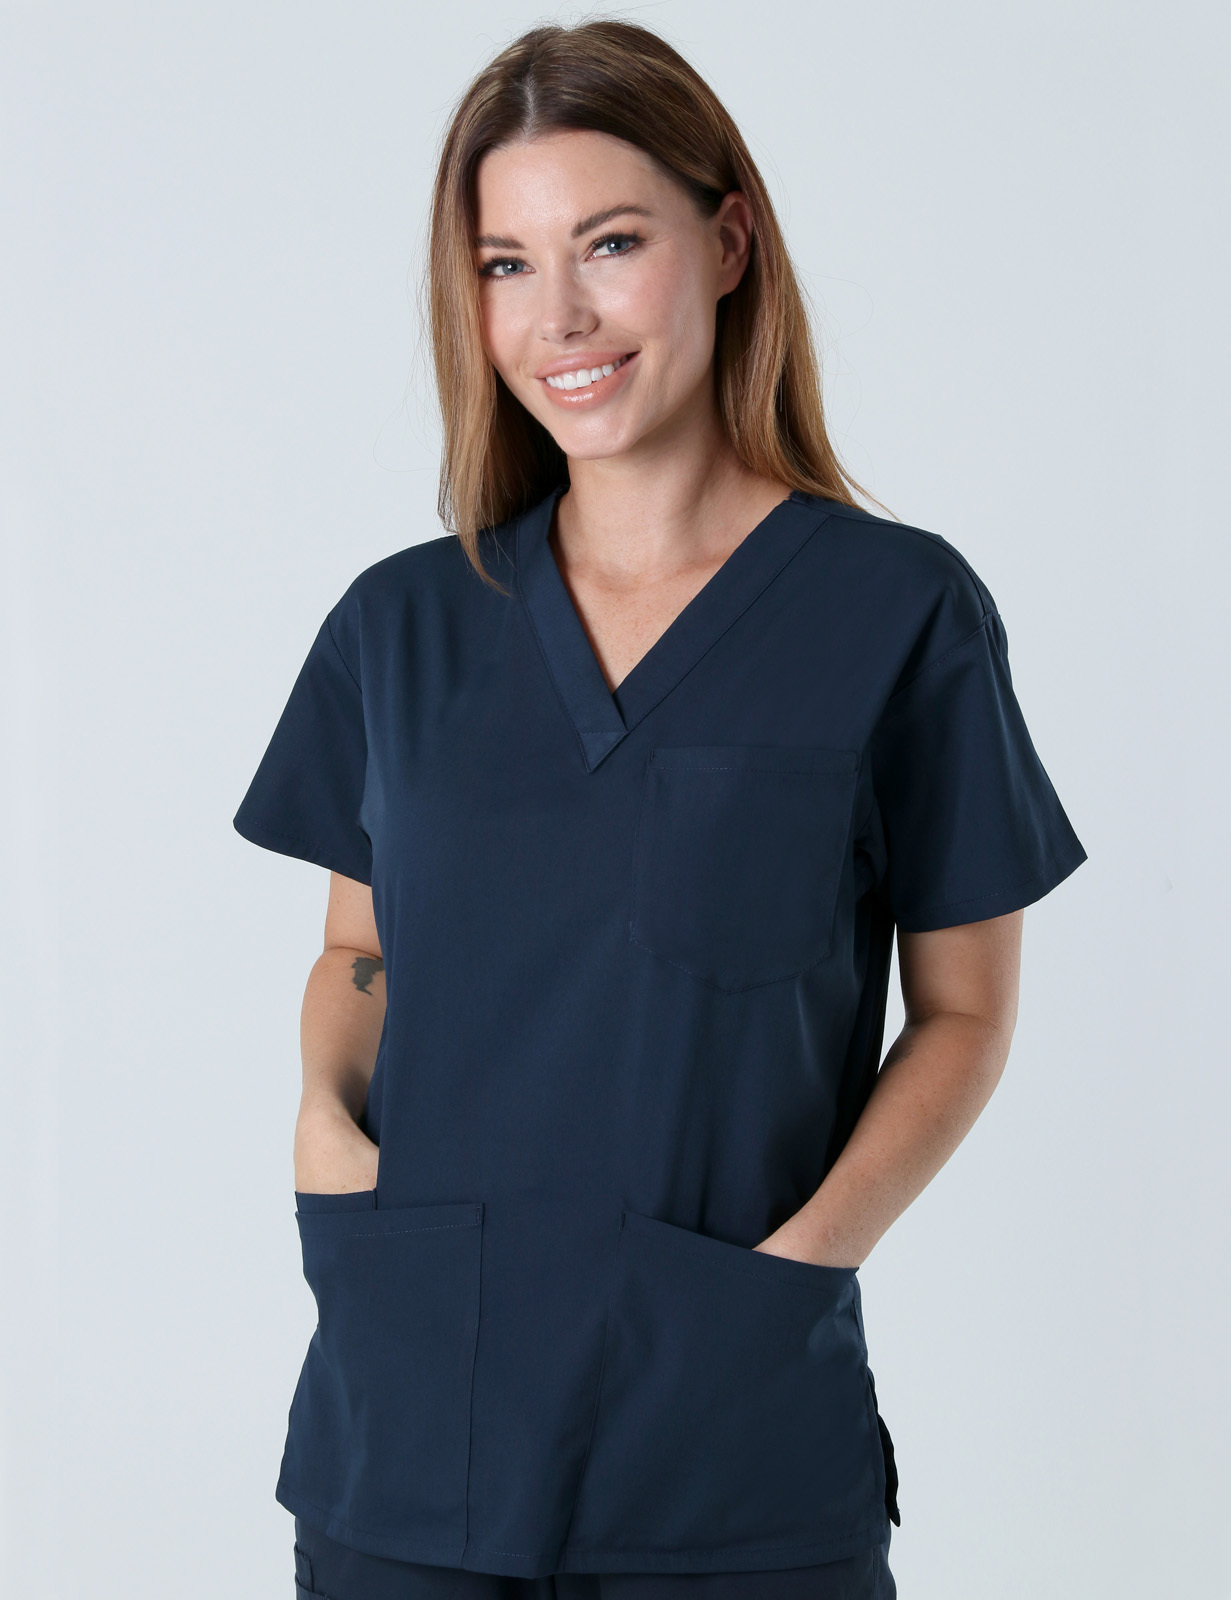 RBWH - 7A South RN (4 Pocket Scrub Top and Cargo Pants in Navy incl Logos)